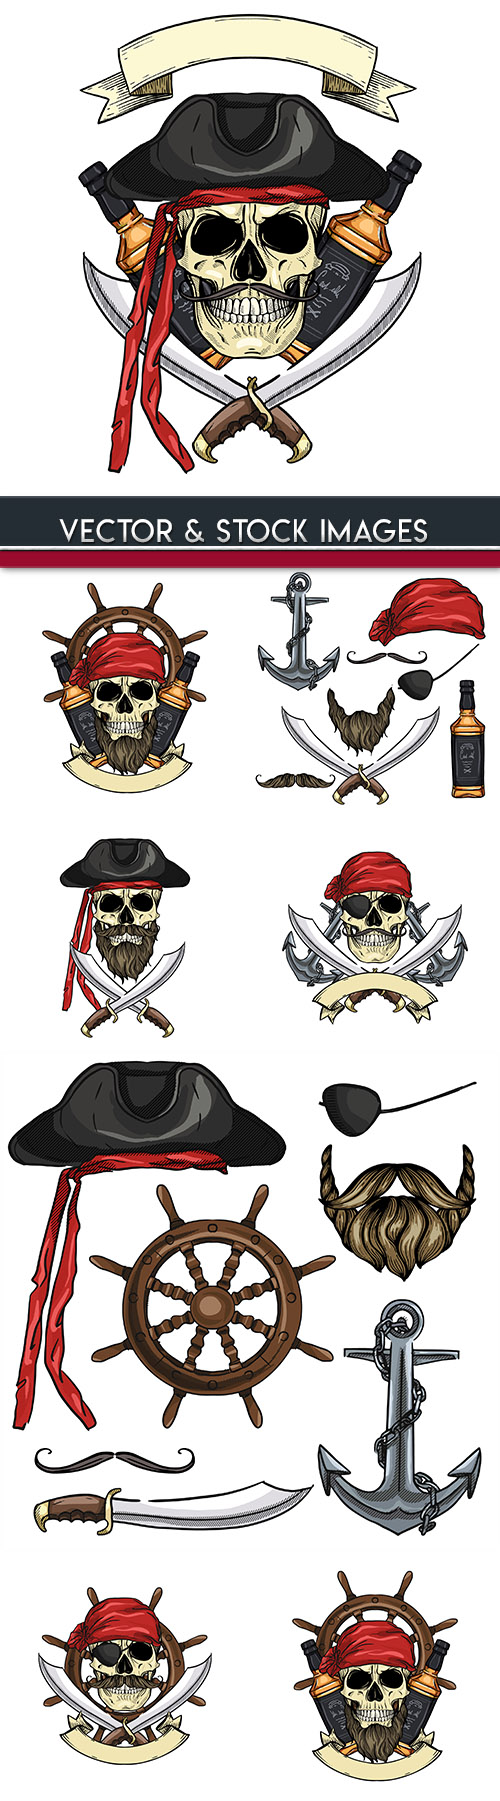 Pirates and weapons with clothing painted illustrations